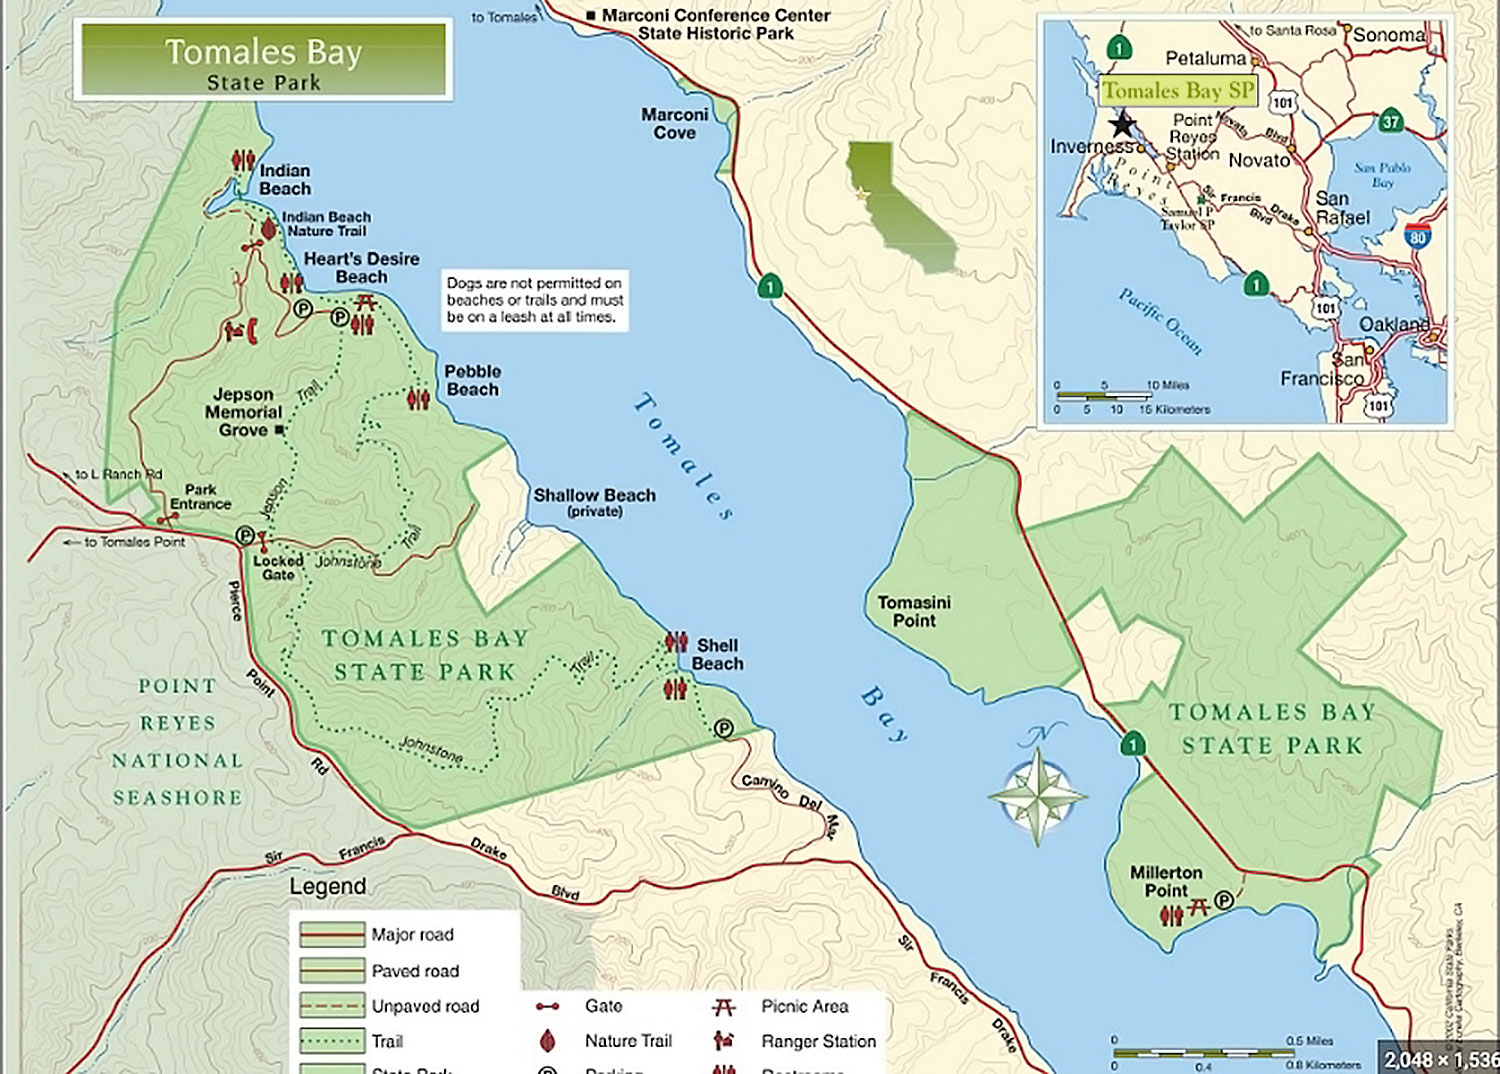 Tomales-Bay-State-Park-MAP-with-insert-San-Francisco-Bay-Area.jpg